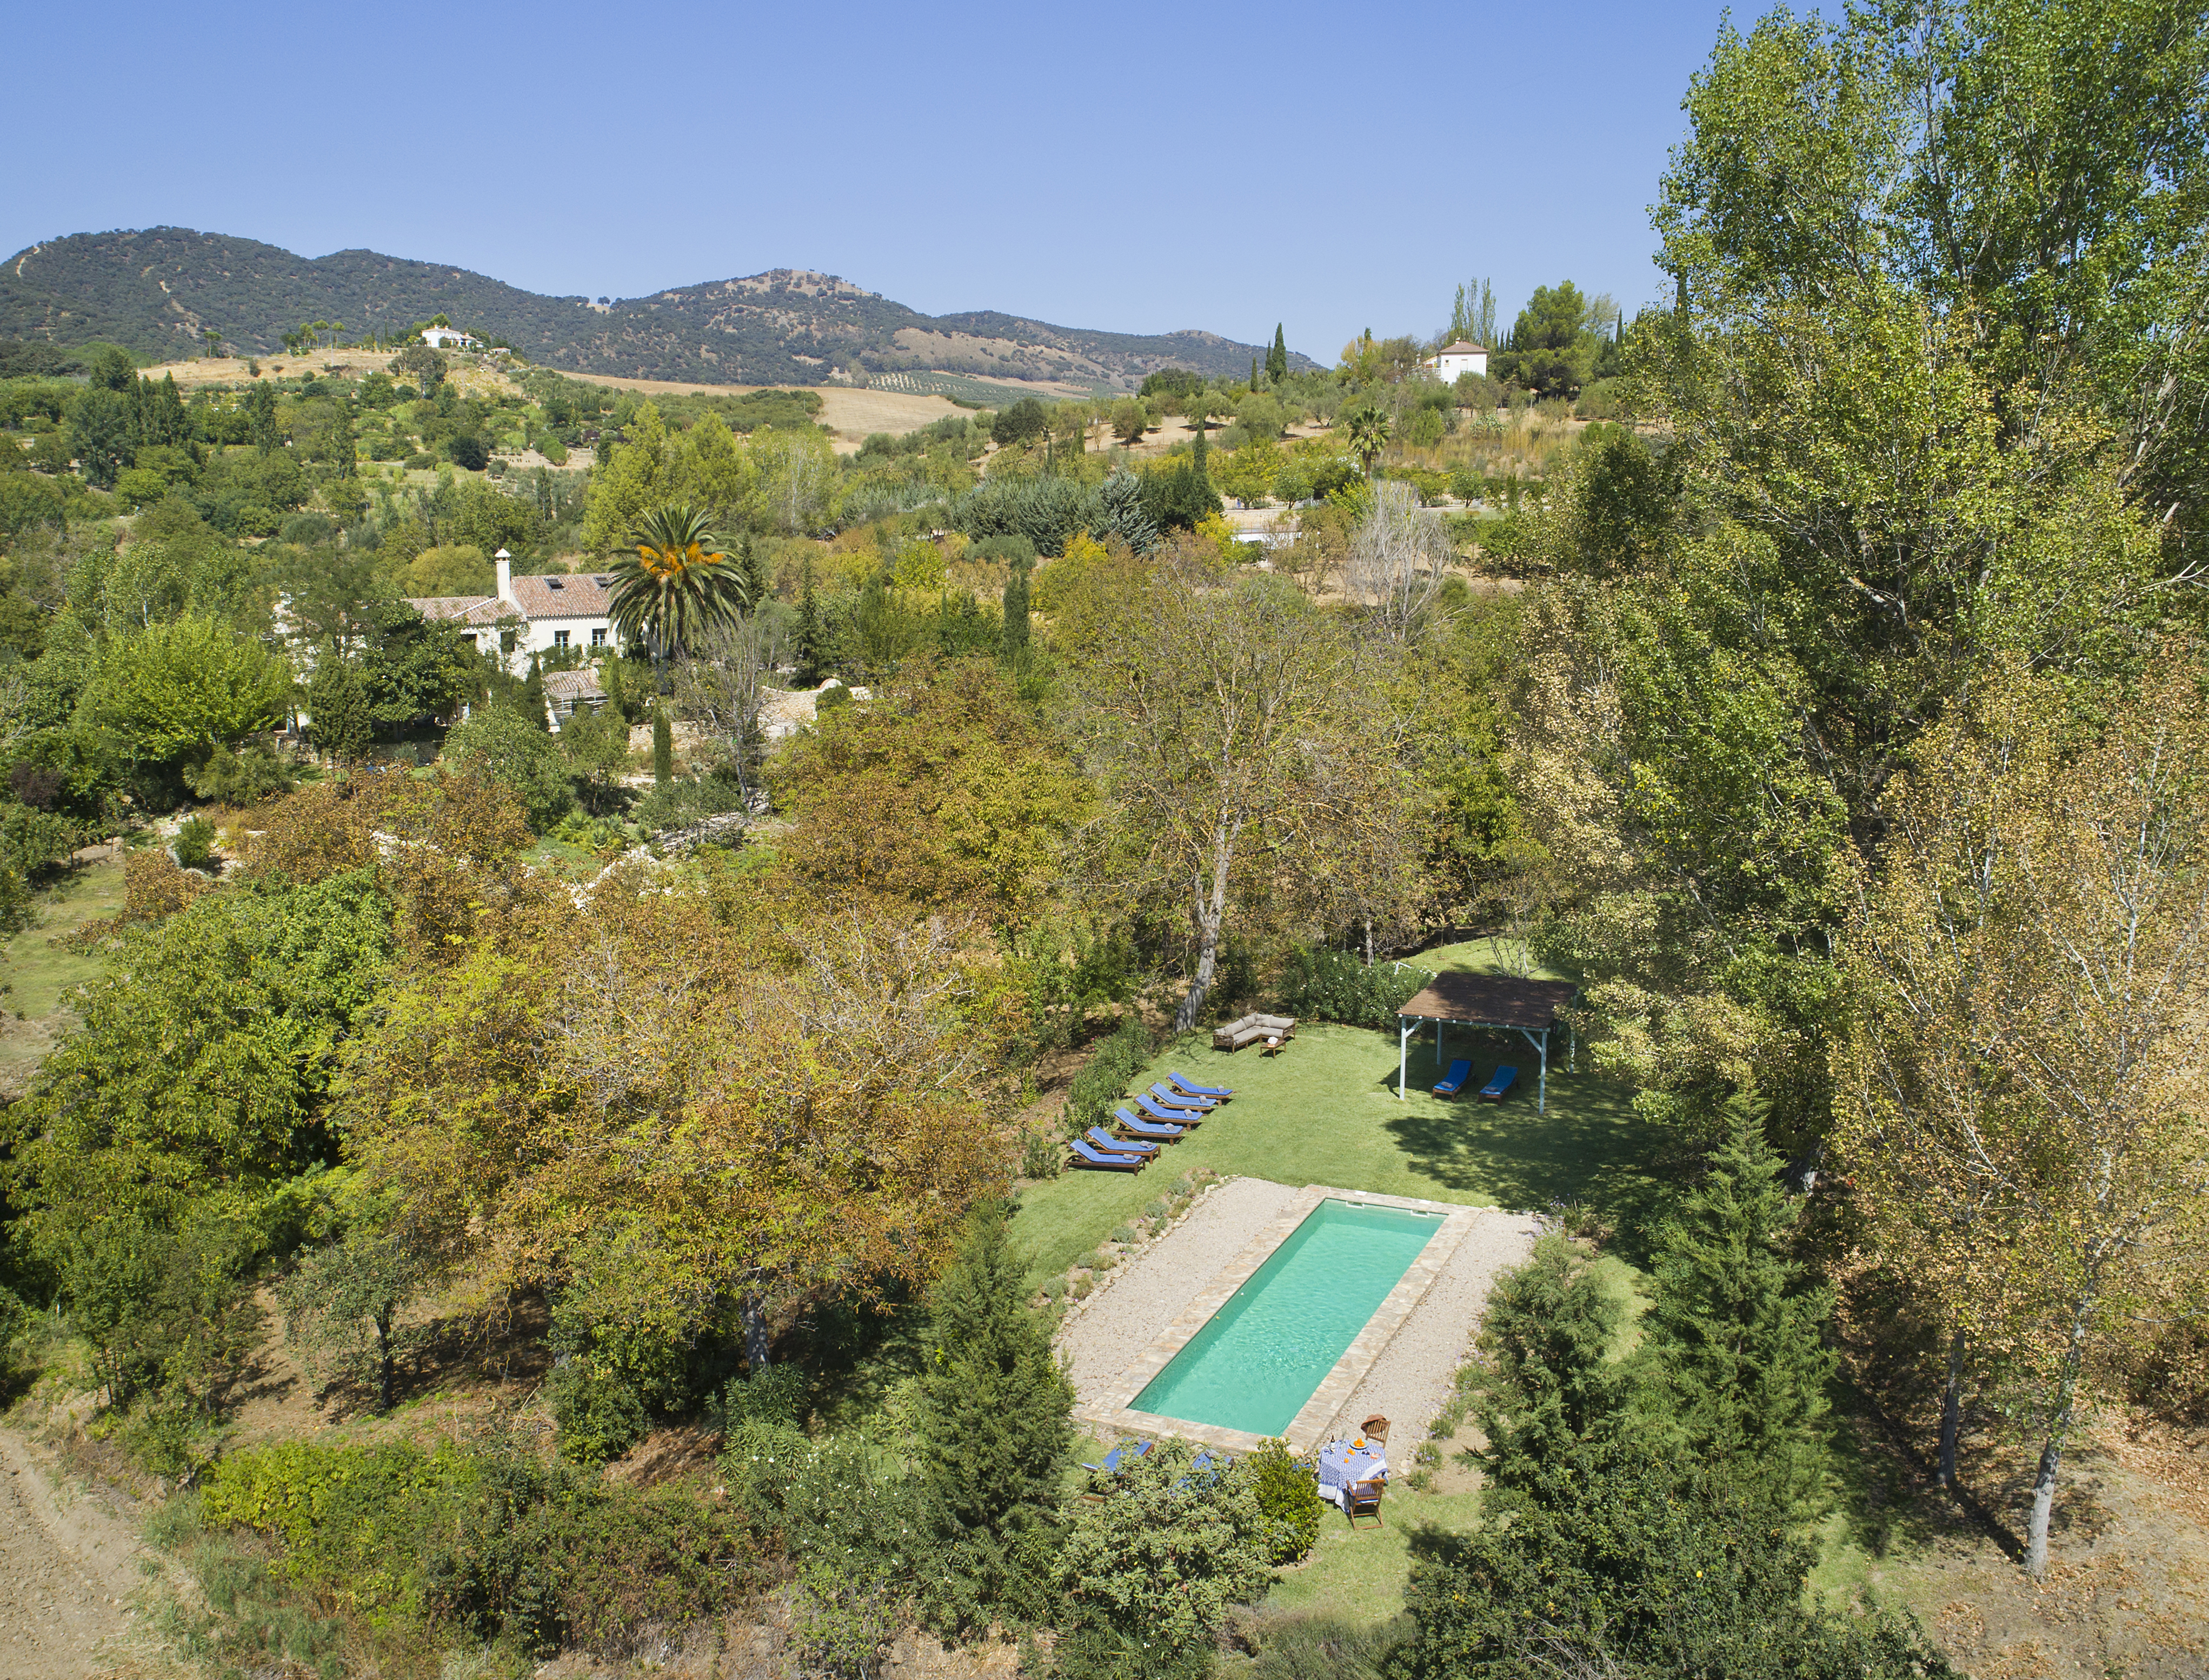 CASA MAIA - Aerial of house and pool